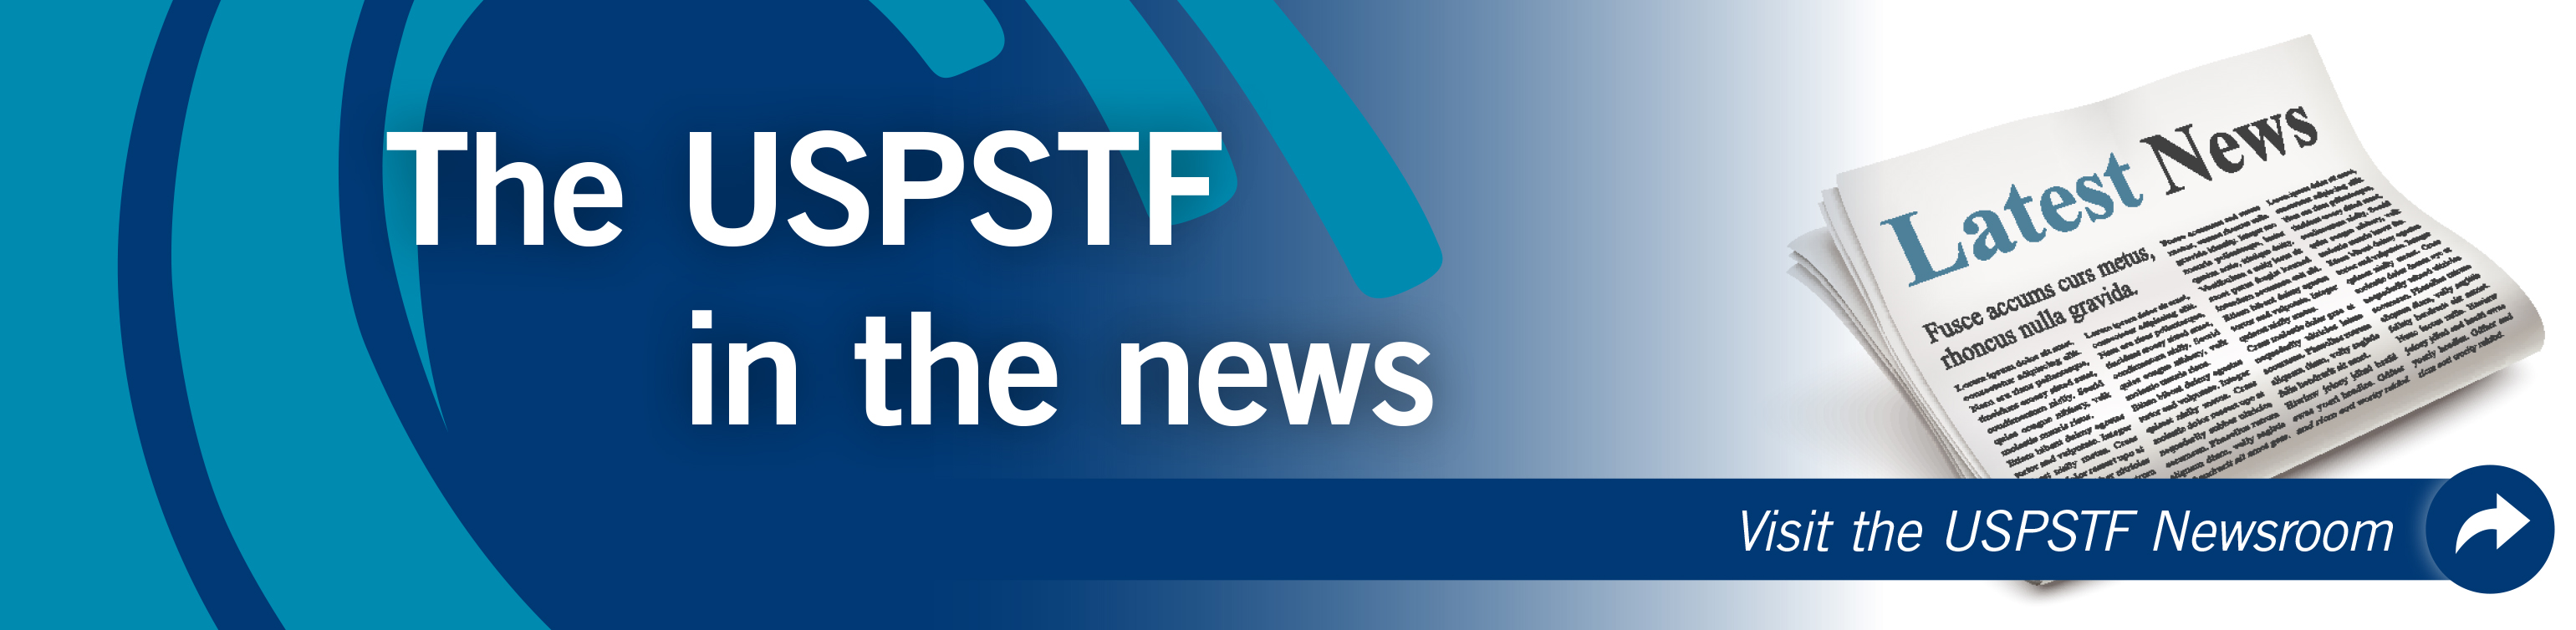 The USPSTF in the news